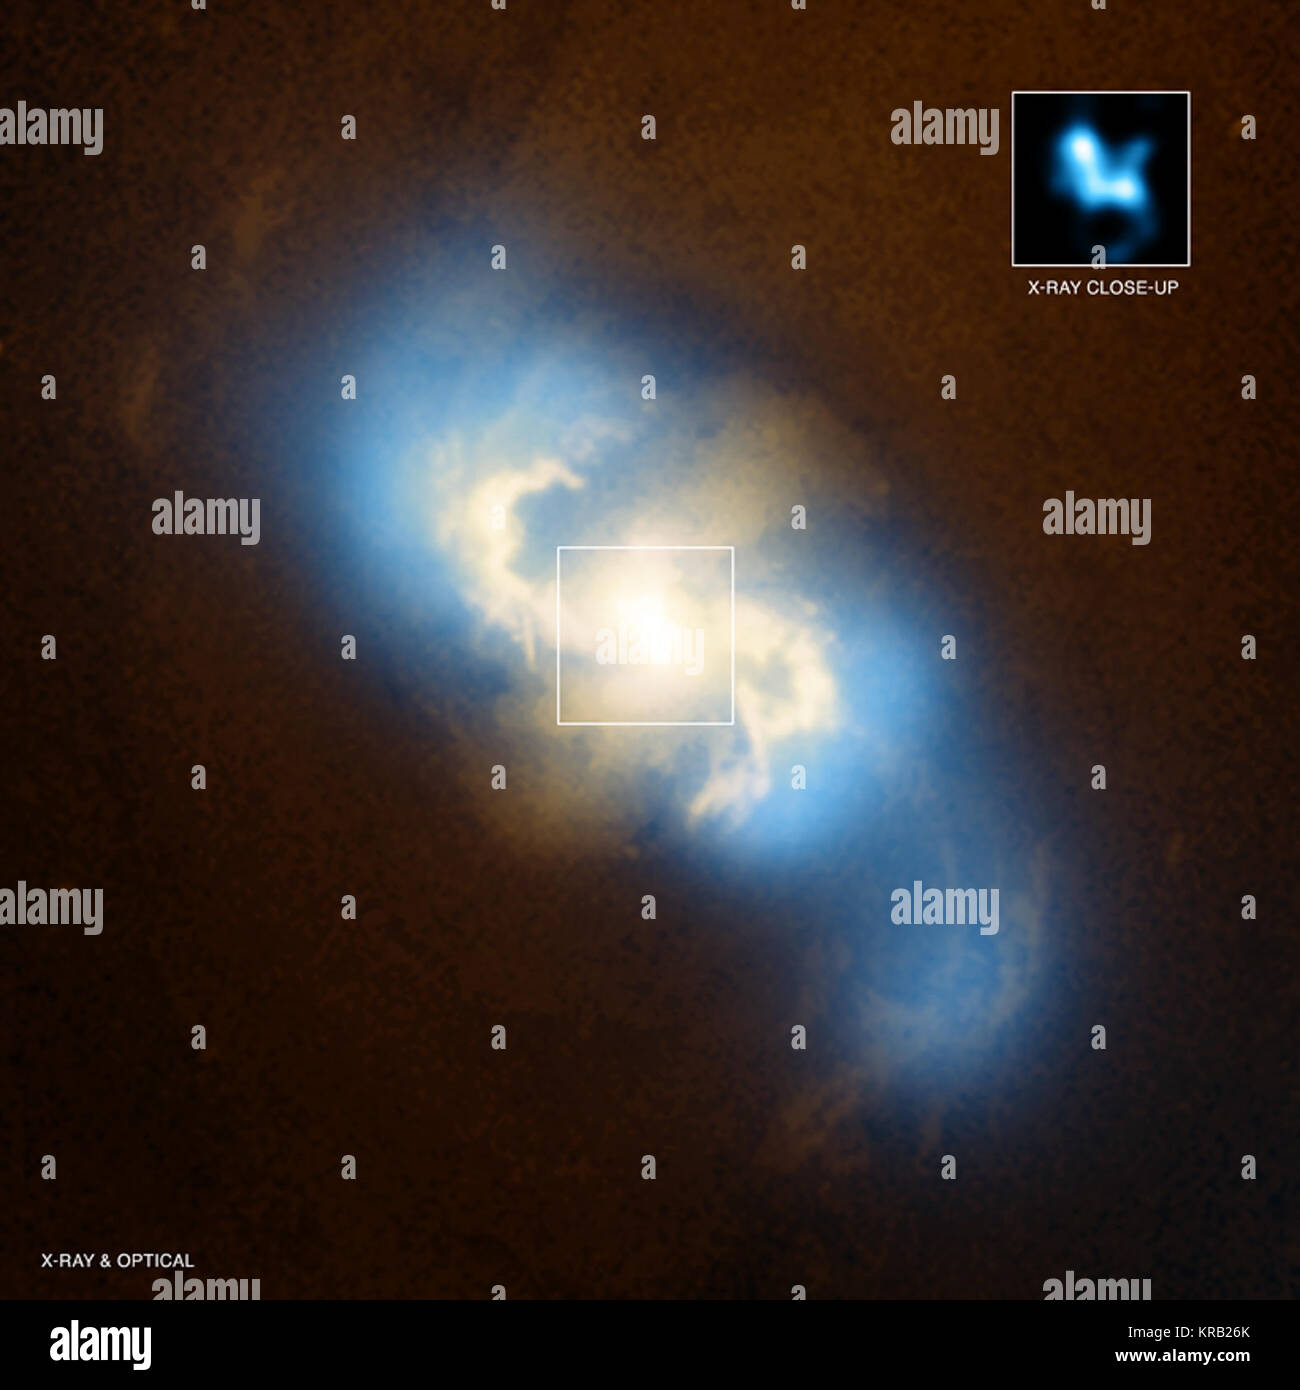 Evidence for a pair of supermassive black holes in a spiral   galaxy has been found in data from NASA's Chandra X-ray Observatory.    This main image is a composite of X-rays from Chandra (blue) and optical data from the Hubble Space Telescope (orange and yellow) of the spiral galaxy NGC 3393. Meanwhile, the inset box shows the central region of NGC 3993 as observed just by Chandra. Two separate peaks of X-ray emission (roughly at 11 o'clock and 4 o'clock) can clearly be seen in the inset box.  These two sources are black holes that are actively growing, generating X-ray emission as gas falls  Stock Photo